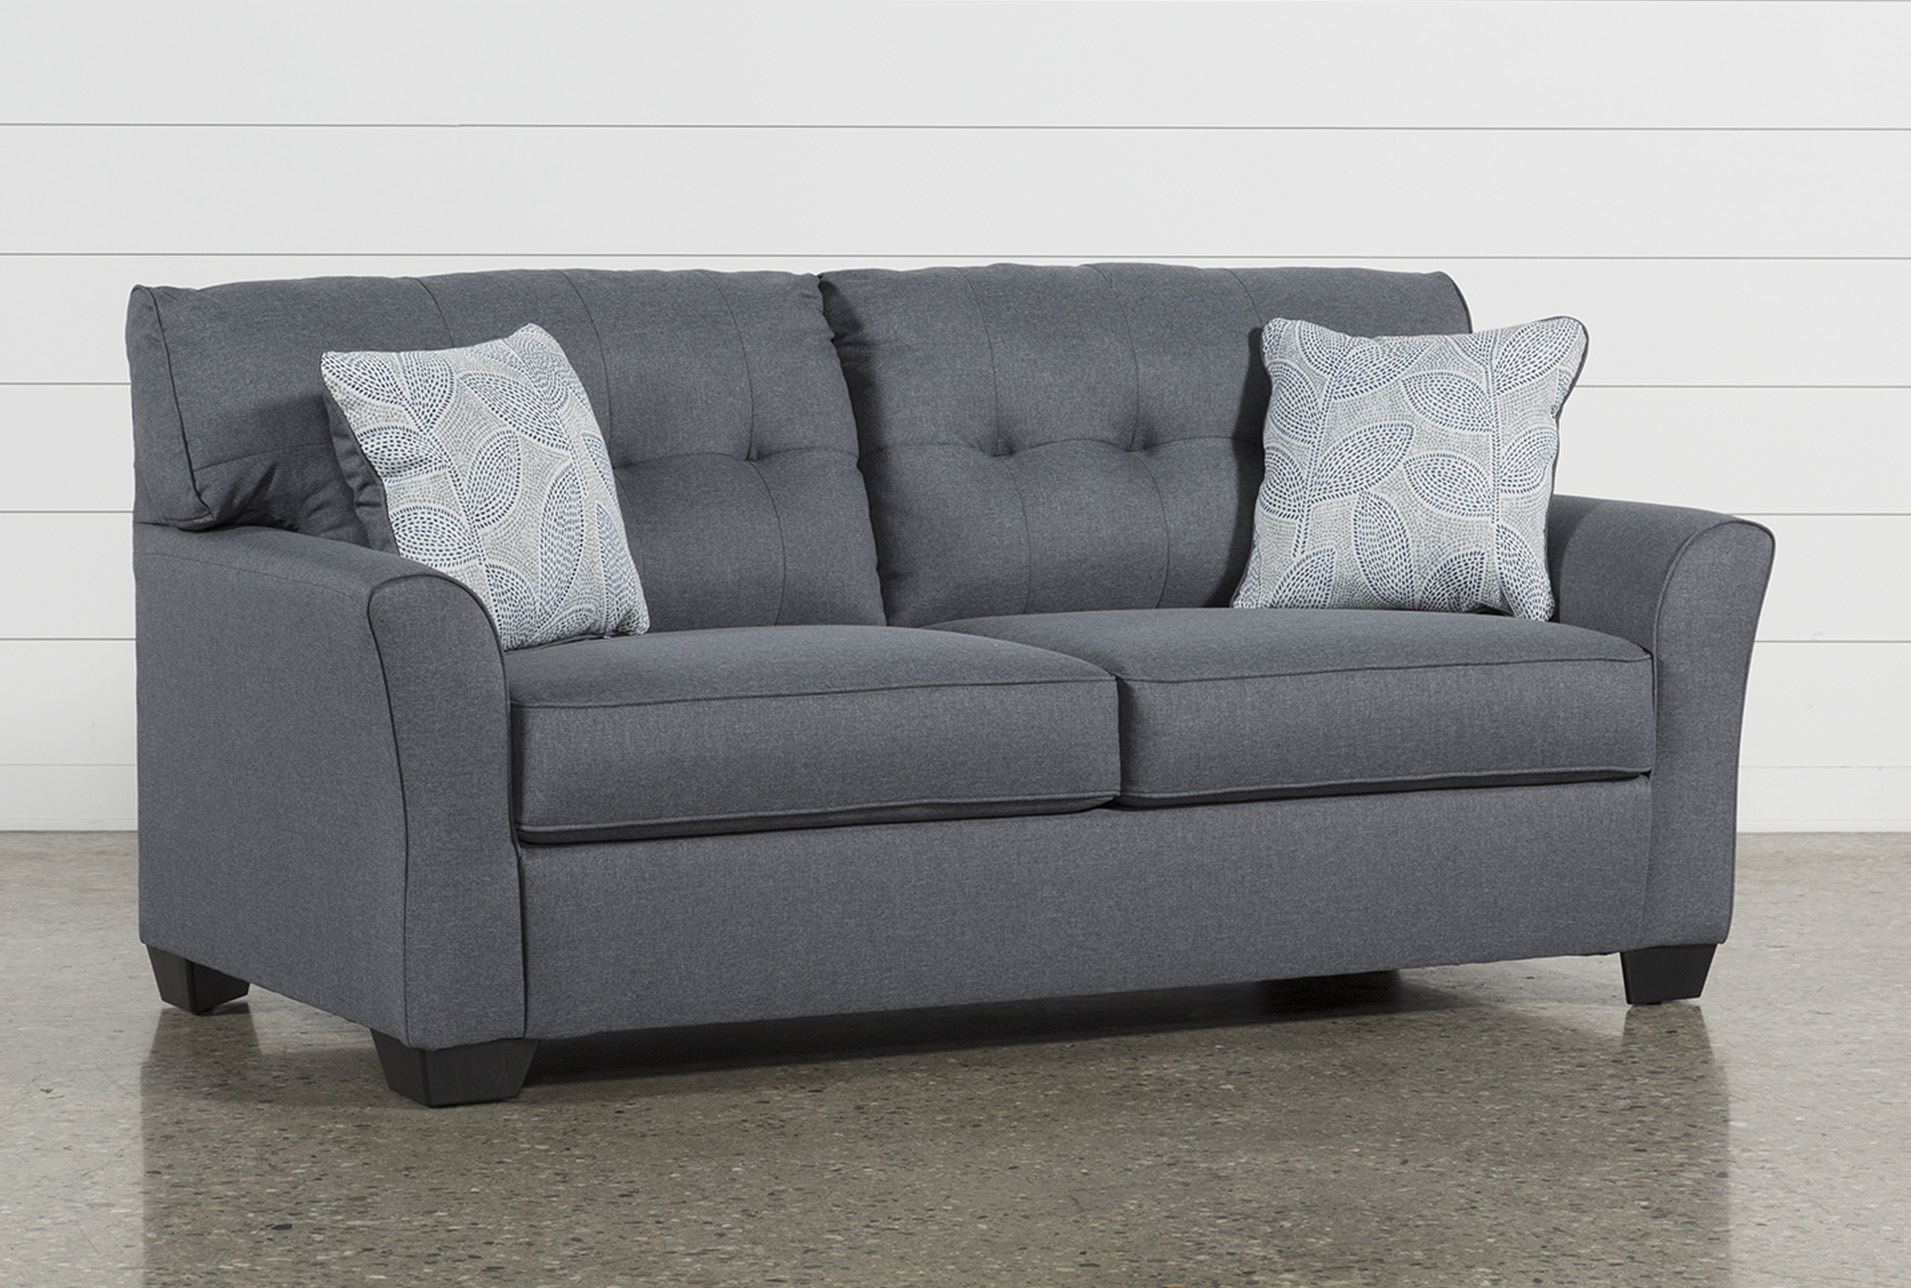 Fabric Sofa Beds + Sleeper Sofas - Free Assembly with Delivery